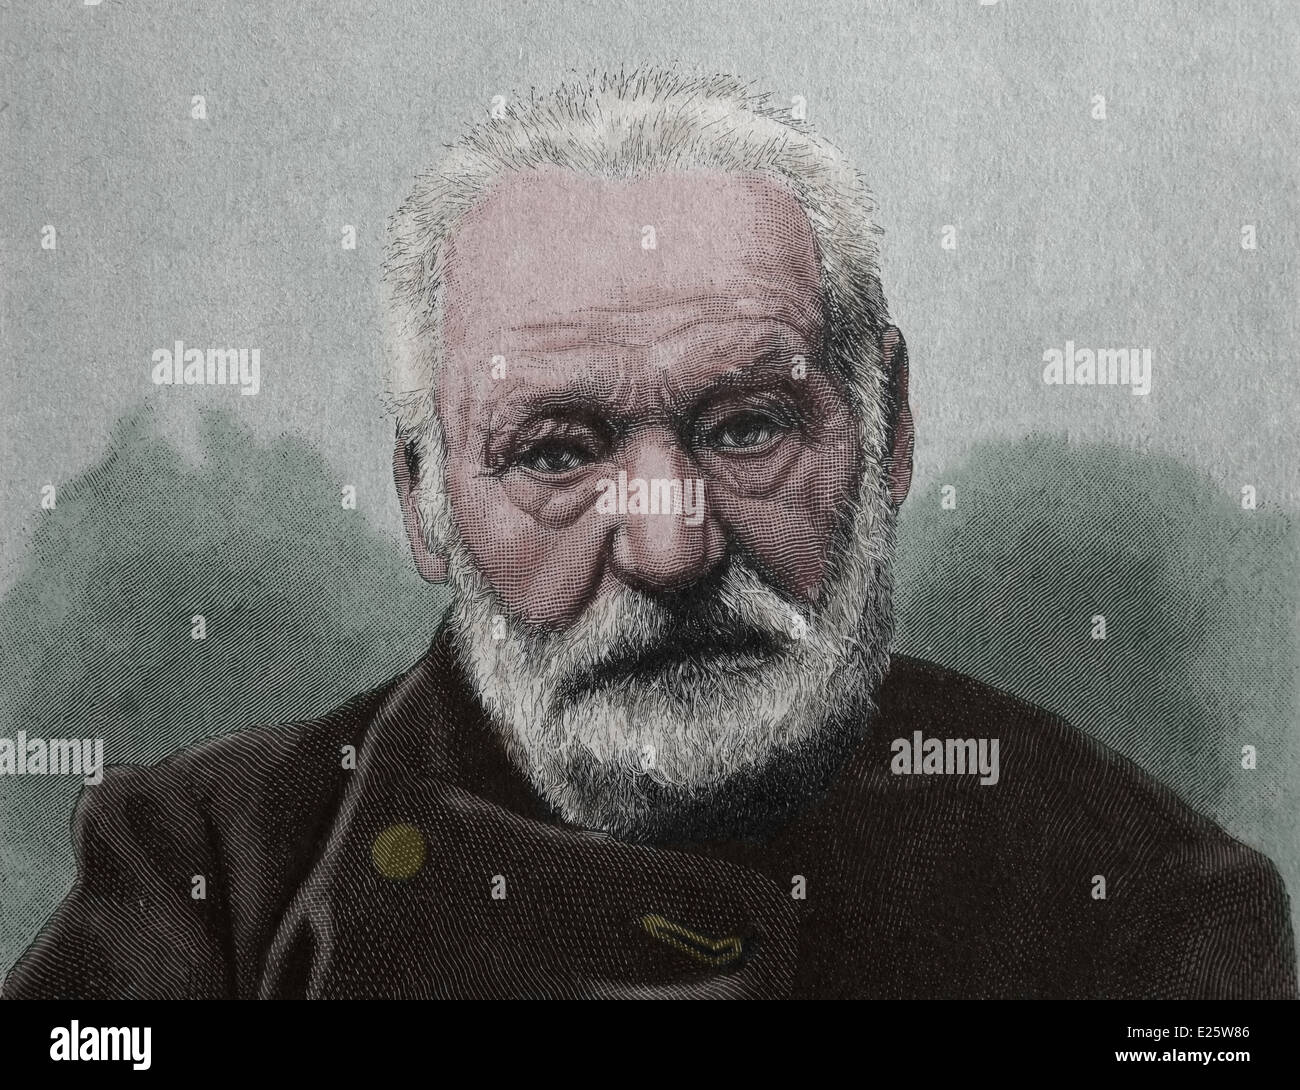 Victor Hugo (1802-1885). French poet, novelist and dramatist of the Romantic movement. Engraving. Color. Stock Photo